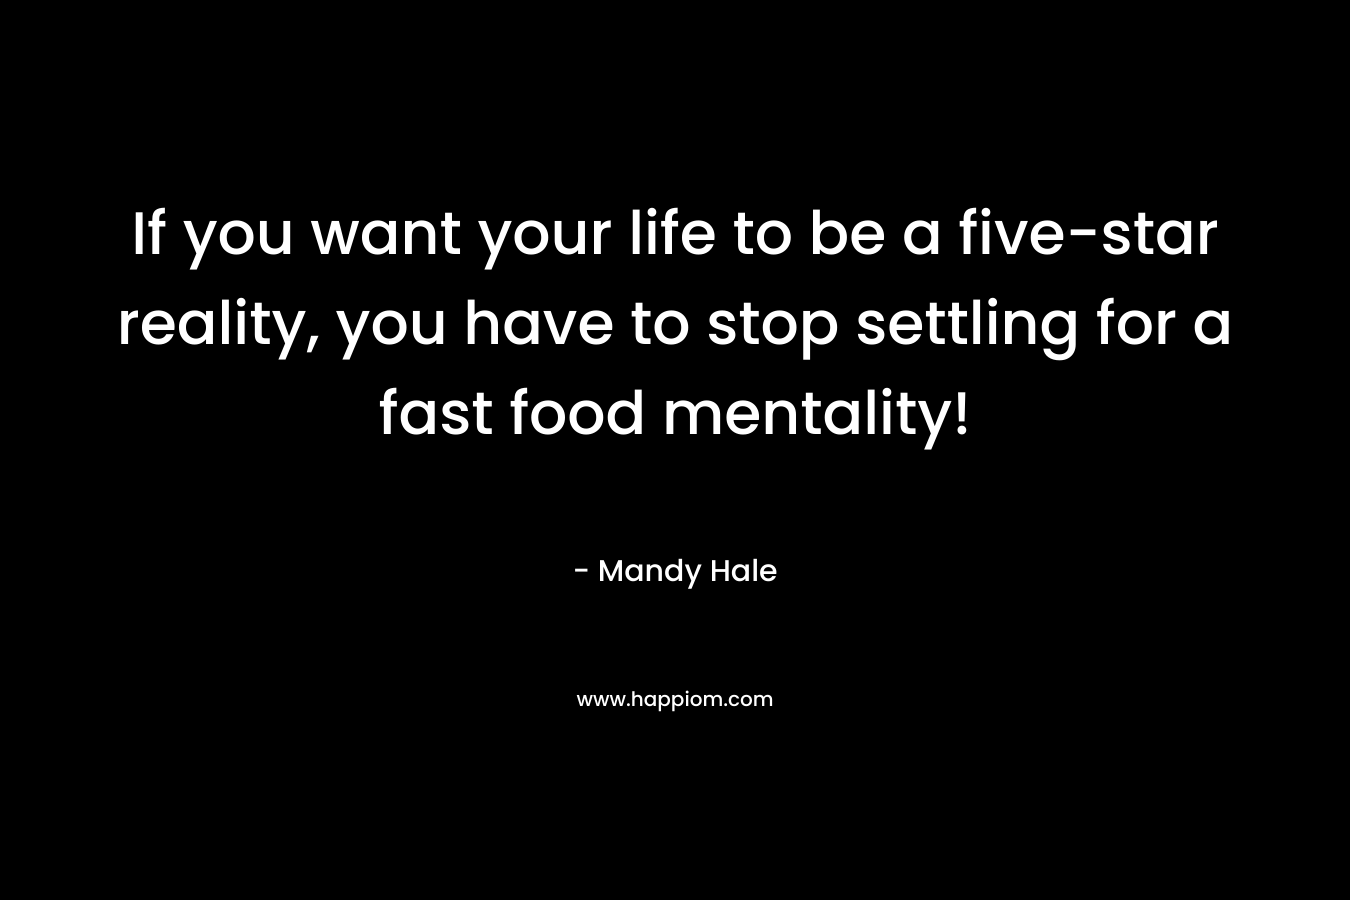 If you want your life to be a five-star reality, you have to stop settling for a fast food mentality!